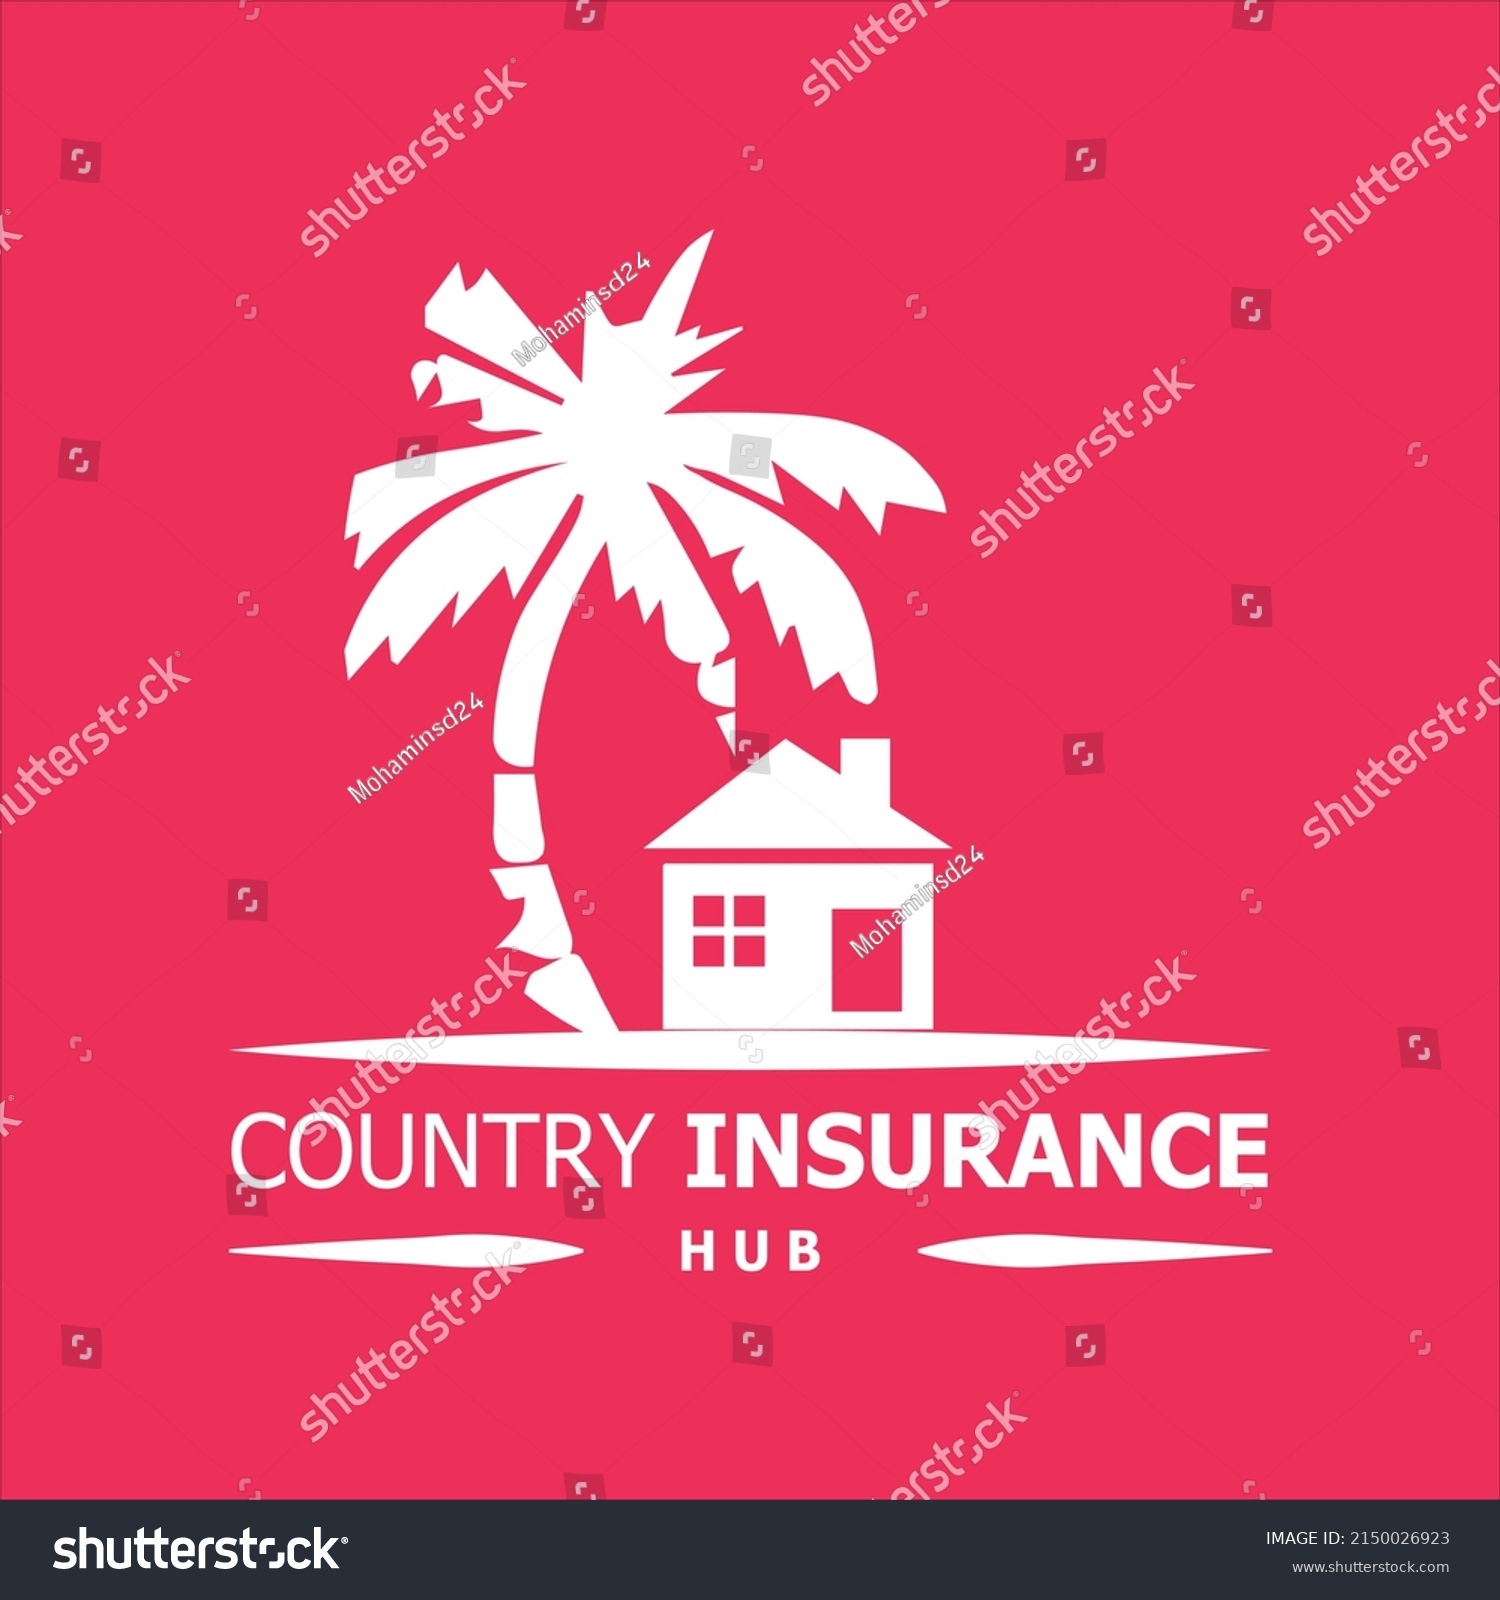 country insurance and financial services va illustrator download